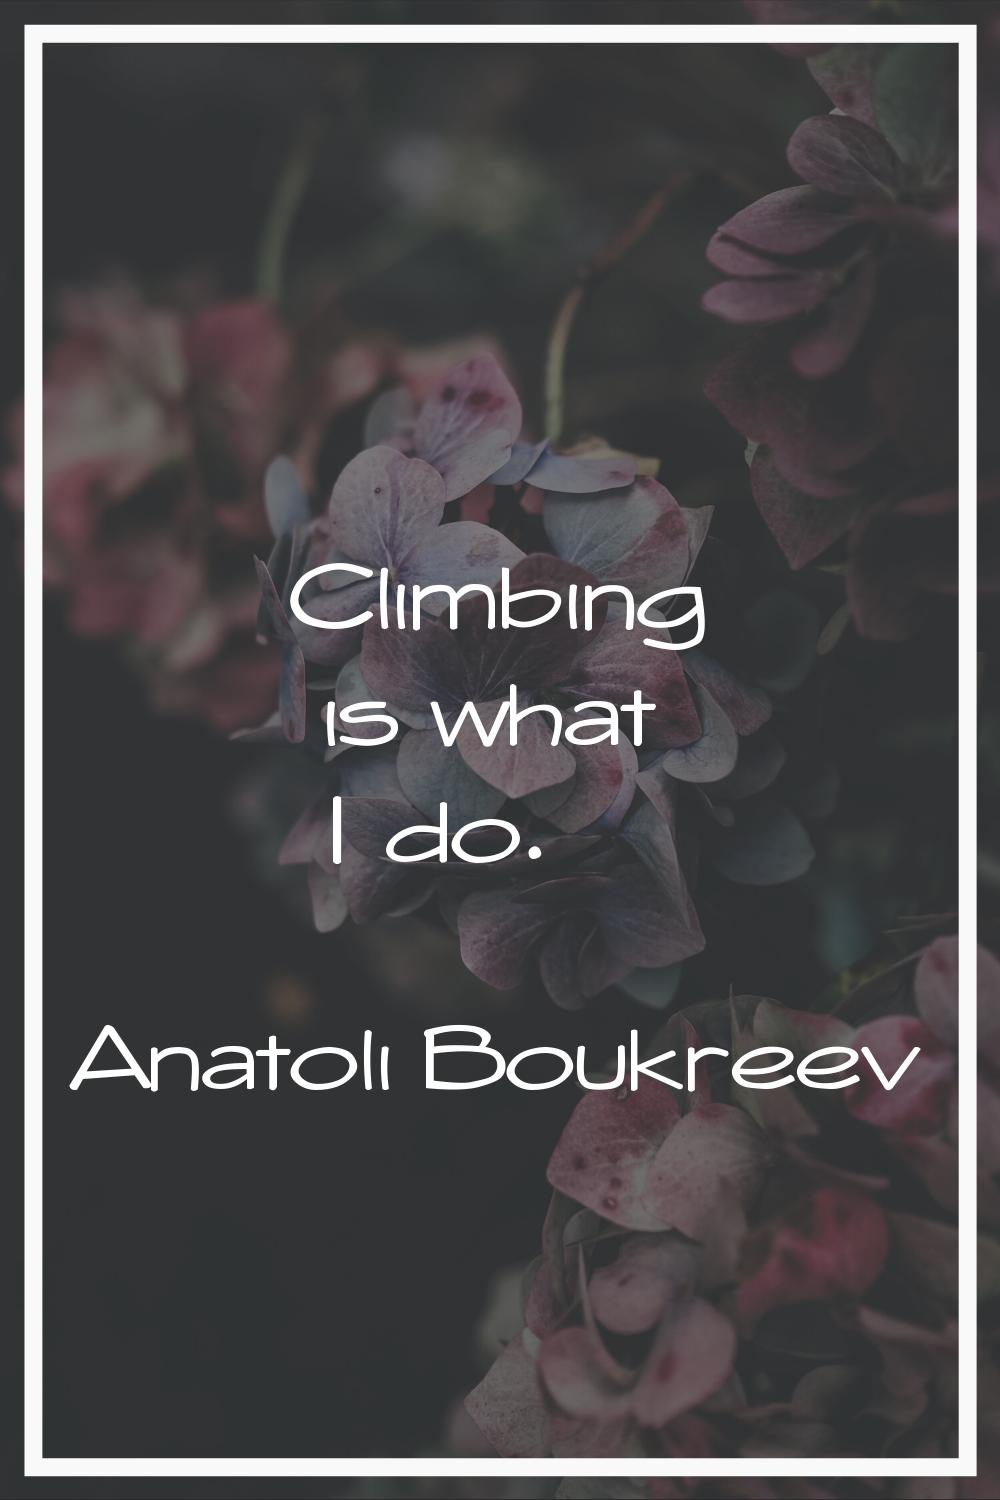 Climbing is what I do.